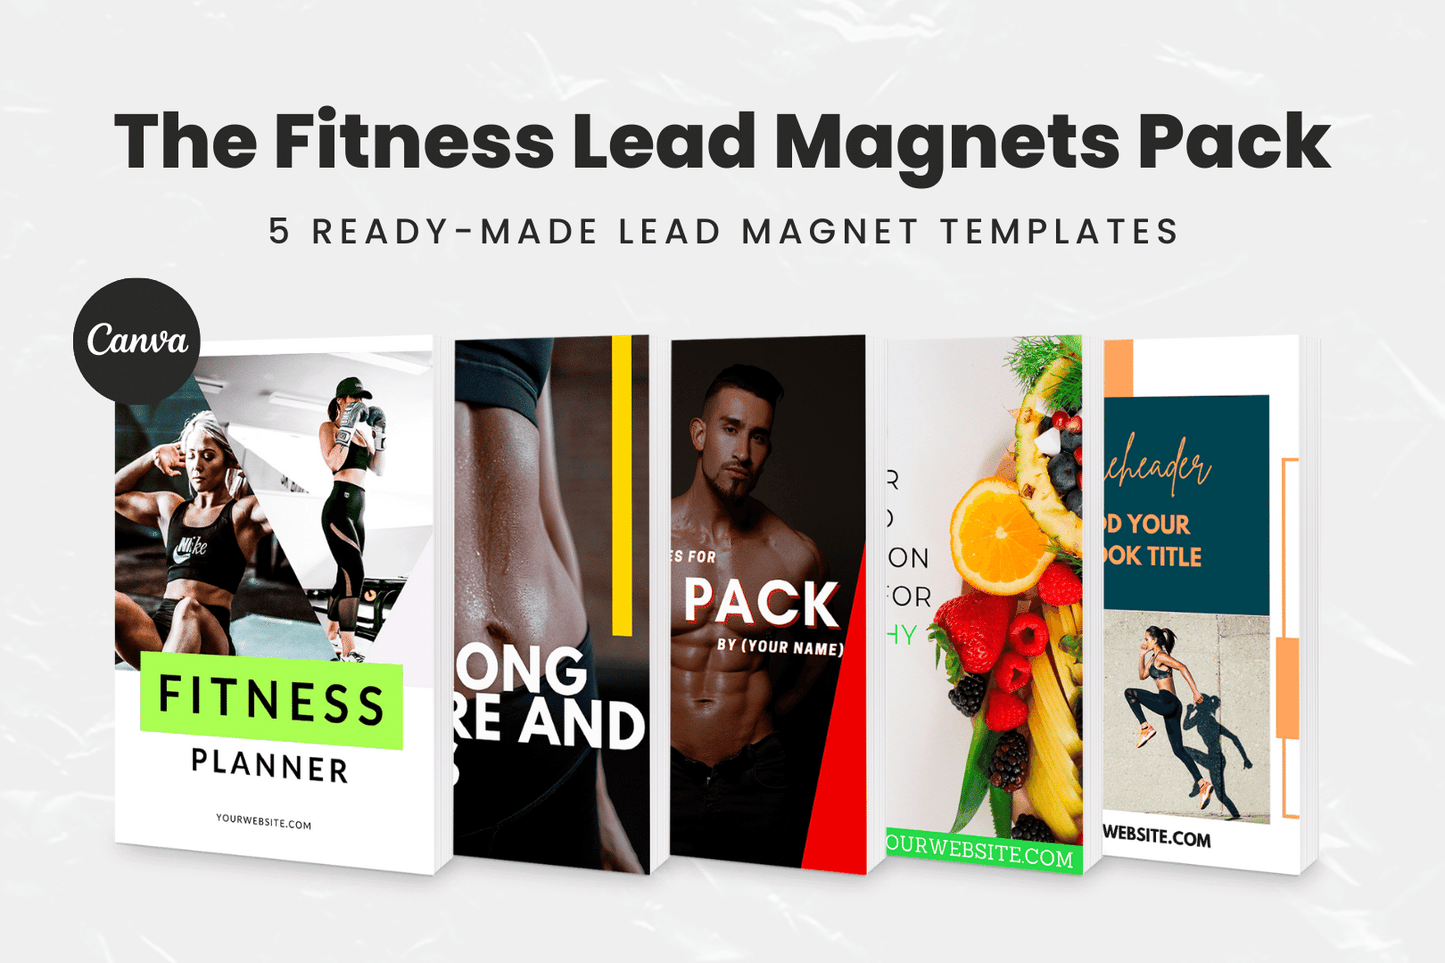 The Fitness Lead Magnets Pack